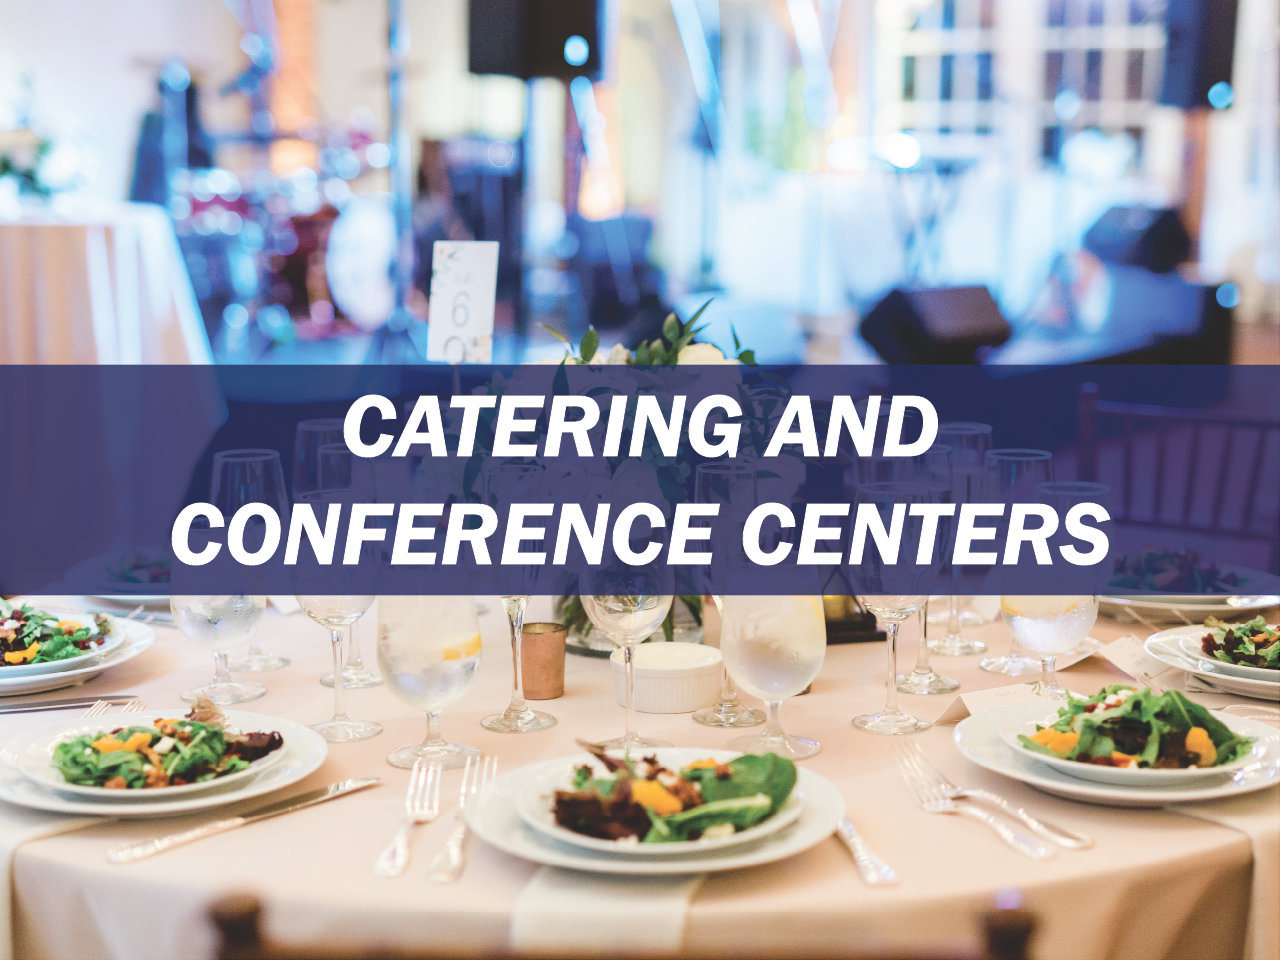 Catering and Conference Centers Survey